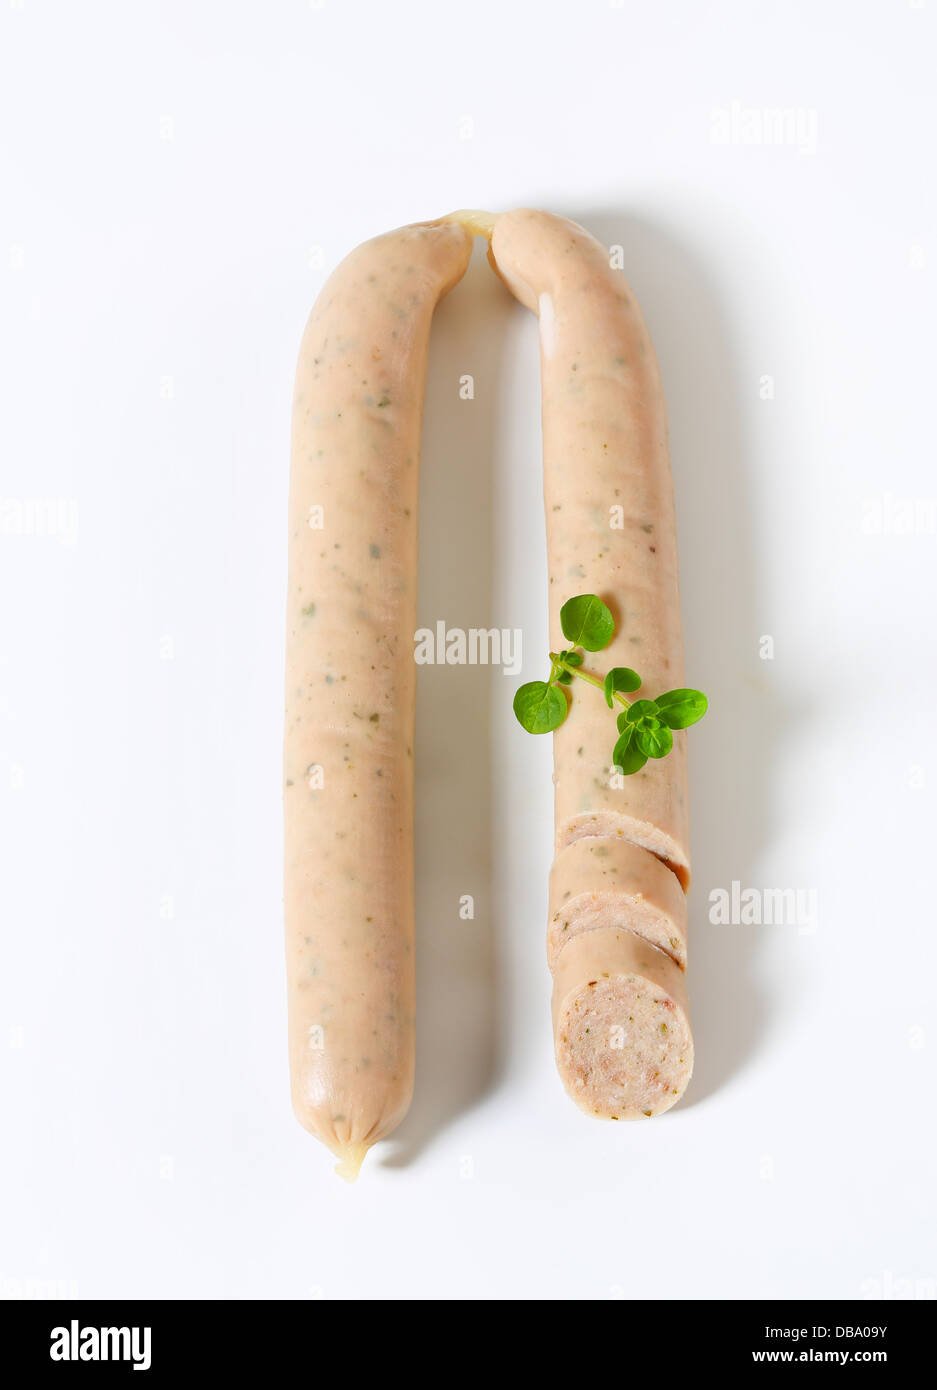 German veal and pork sausages Stock Photo